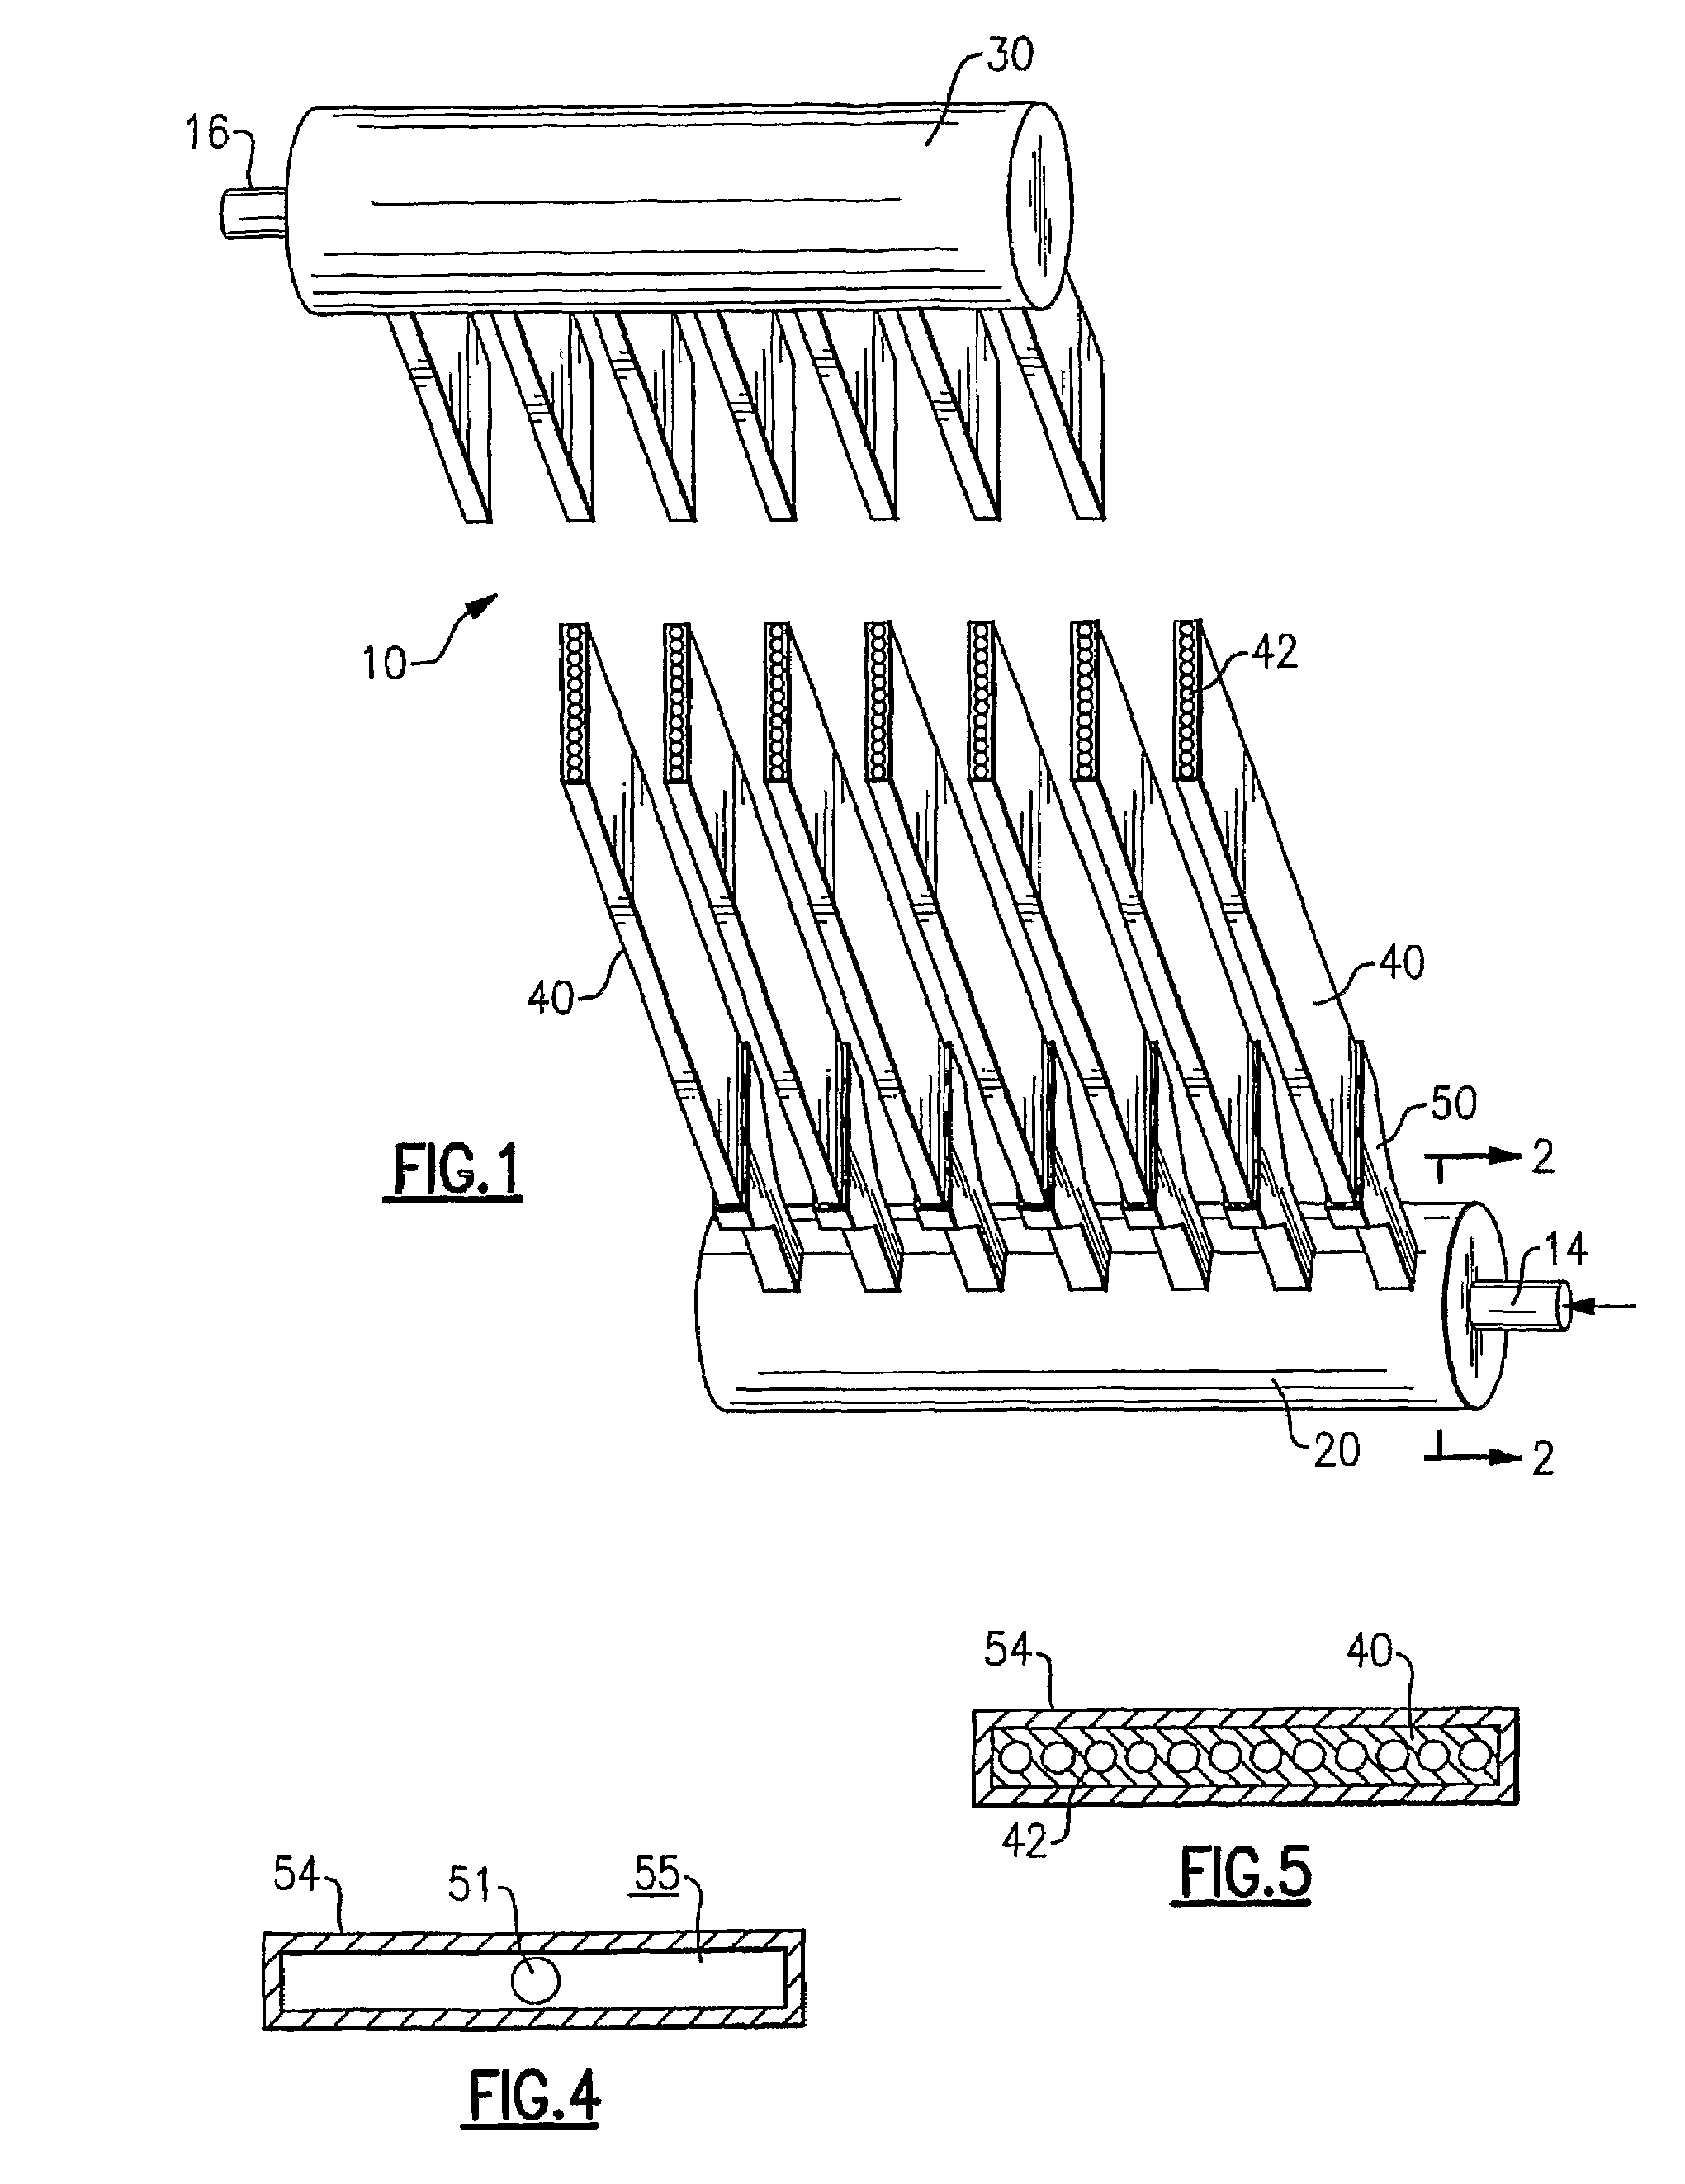 Mini-channel heat exchanger with reduced dimension header